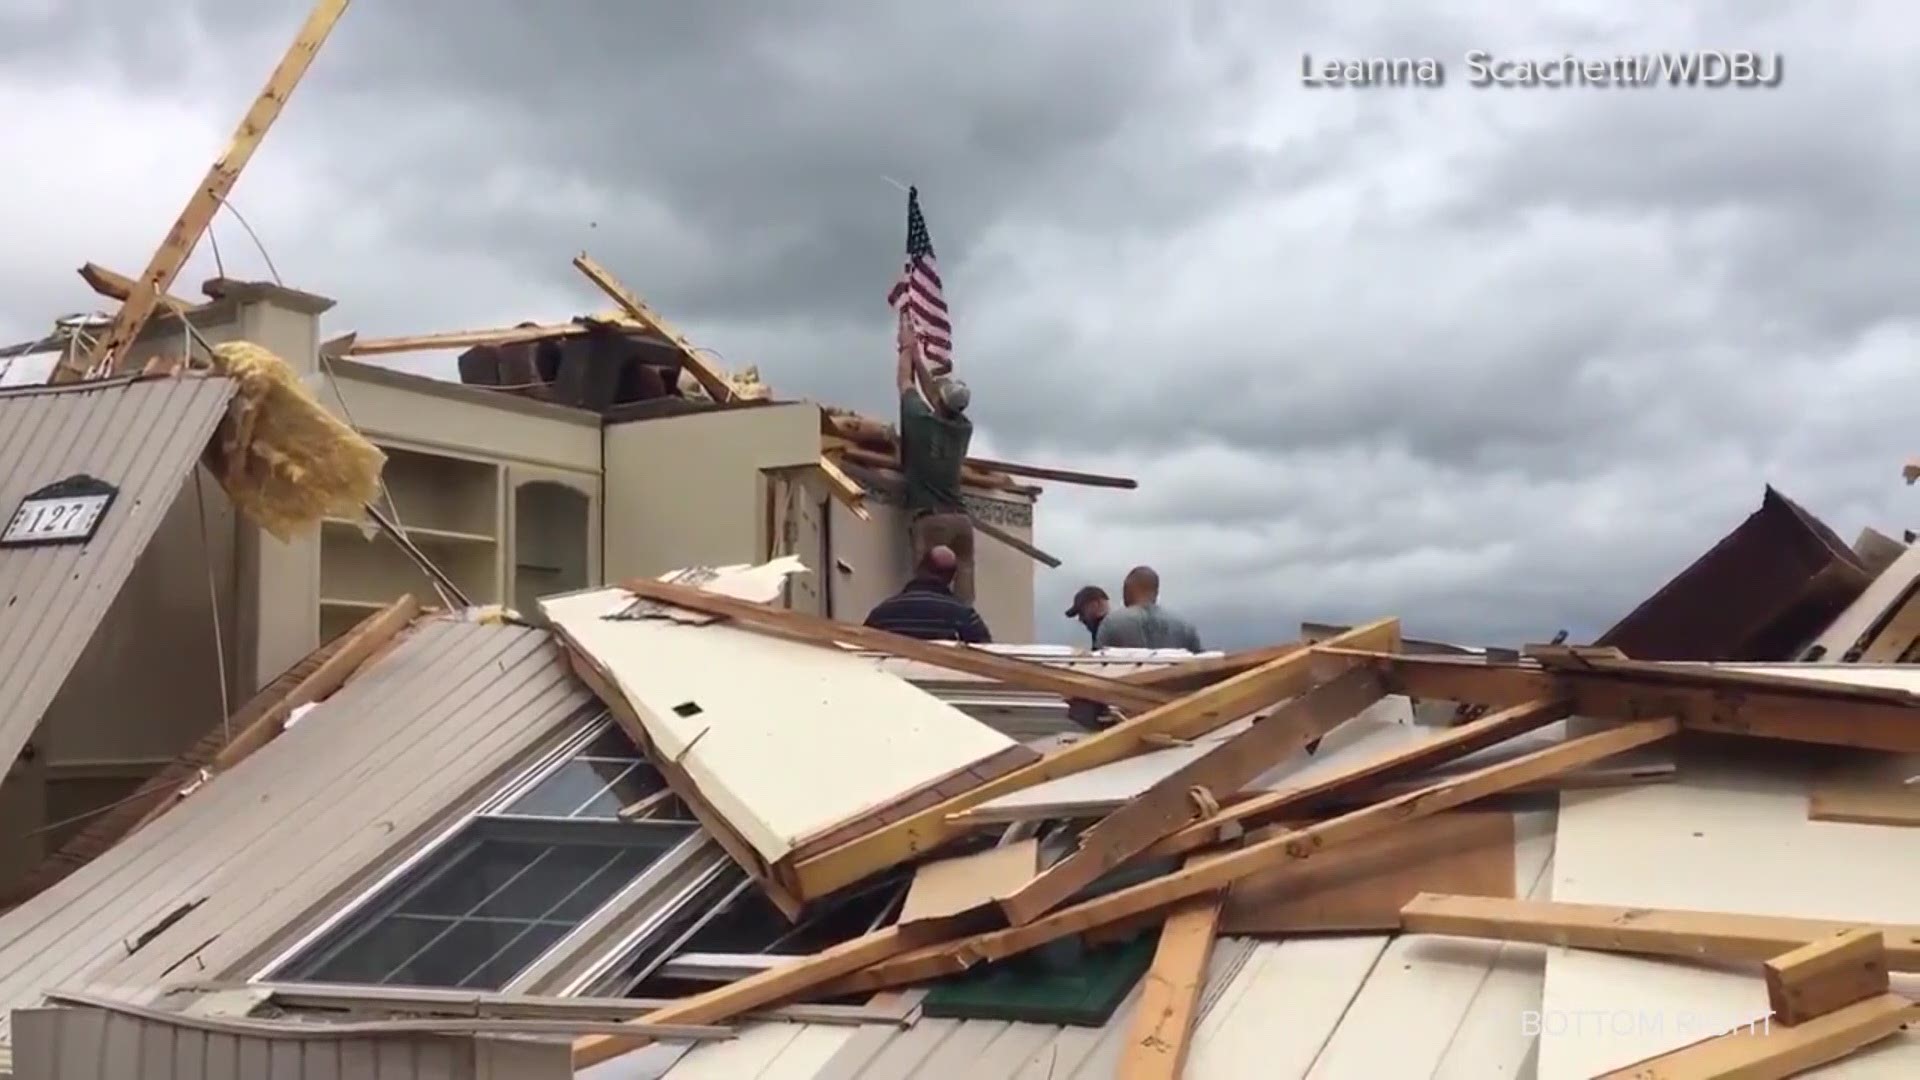 An American Flag was the only thing left standing after a devastating tornado hit in Franklin County, Virginia. Four men worked to rescue the flag from the home as the Leanna Scachetti captured it all on video.